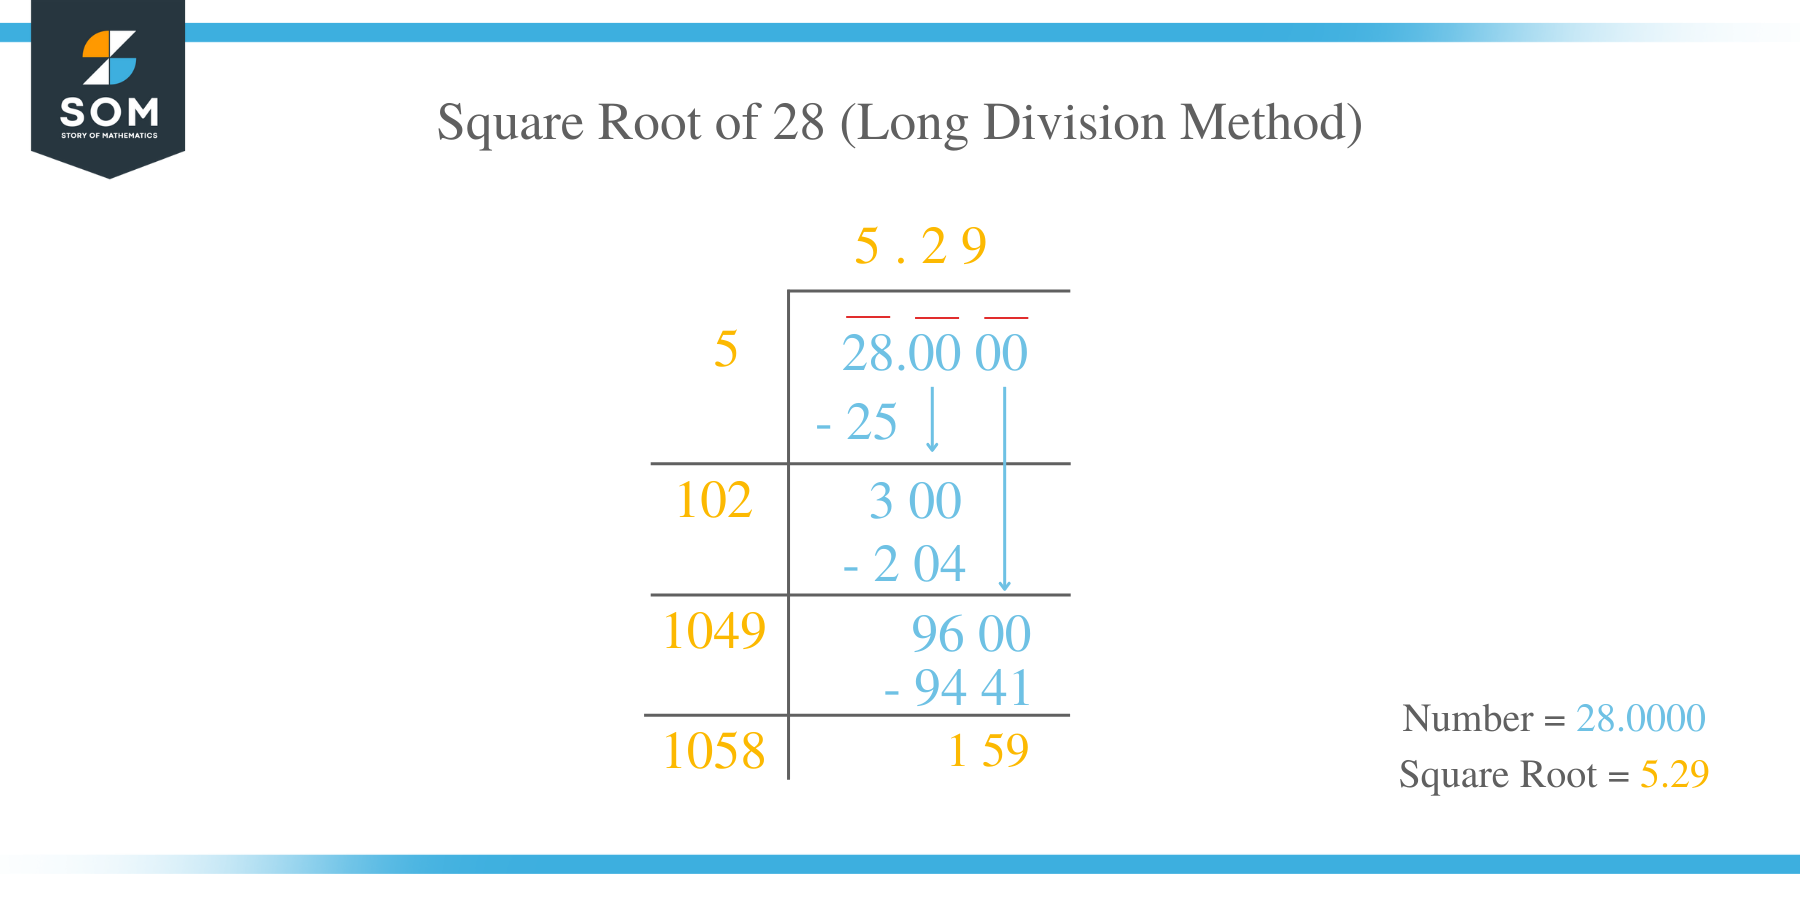 Square Root of 28 by Long Division Method